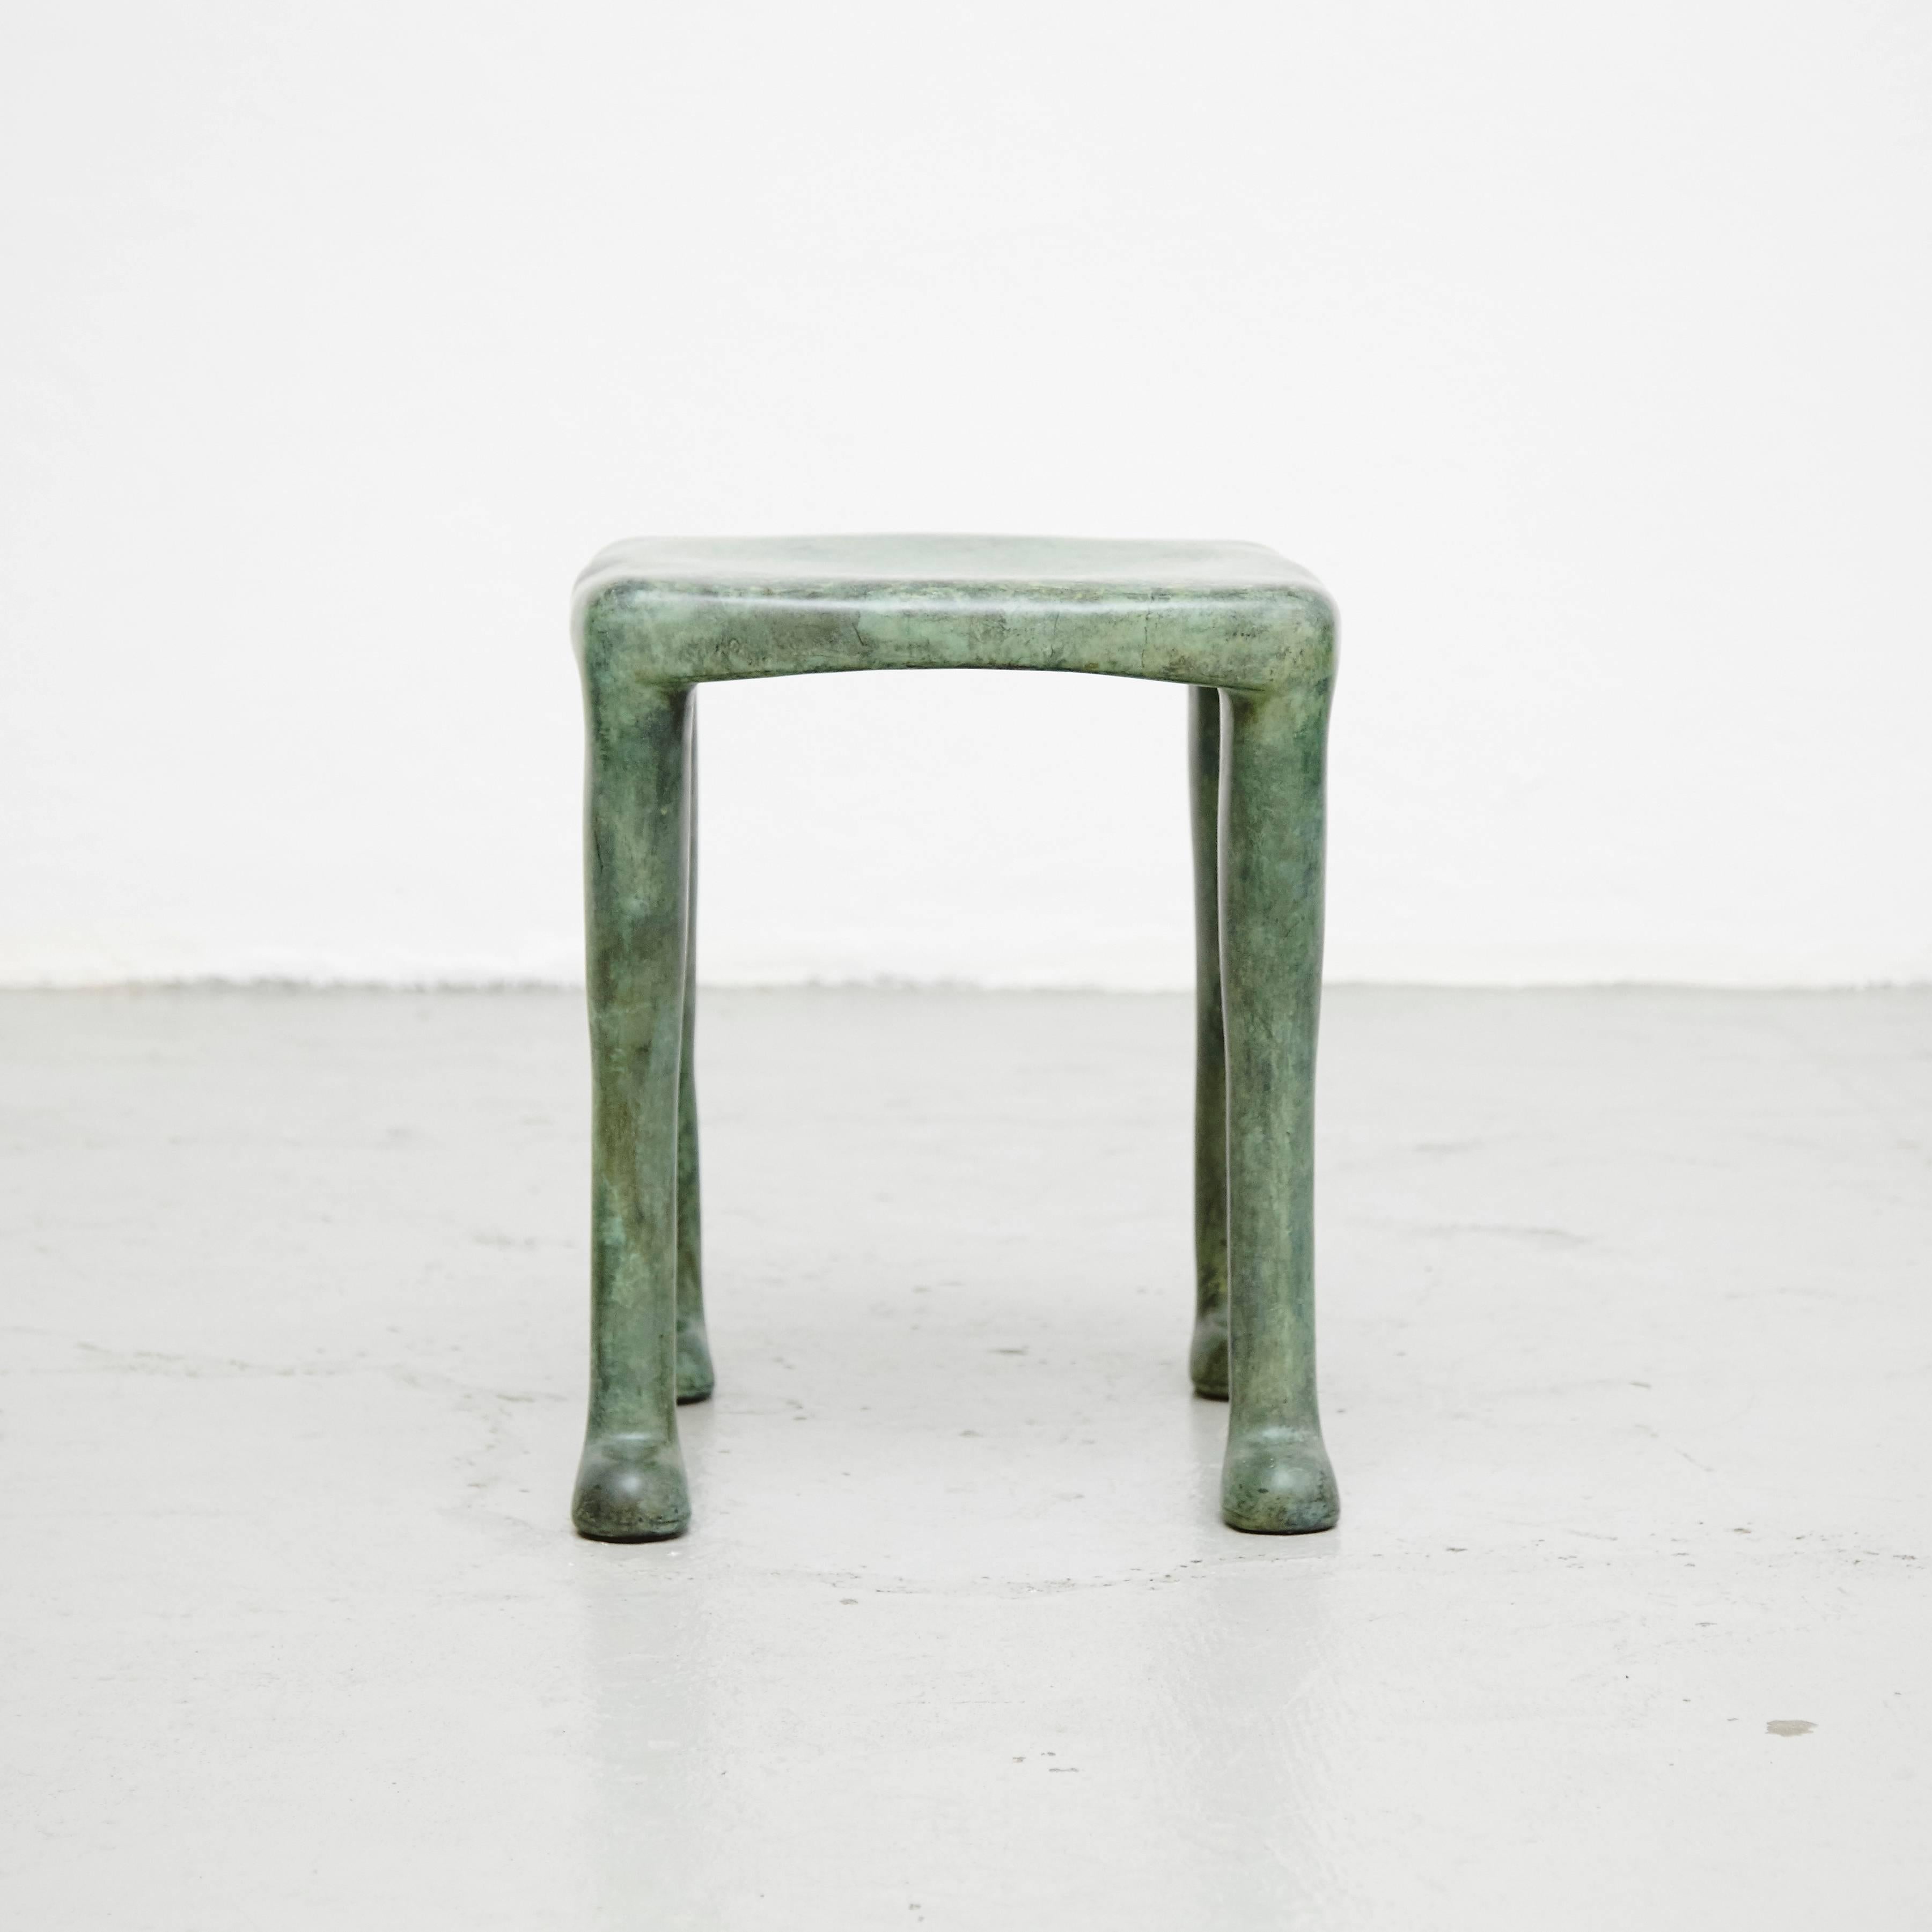 Khamon is a cast bronze stool built as an sculpture. The inspiration for Khamon comes from the willingness to dignify the stool as a piece of furniture often forgotten. It combines a polished finish with a green patina.

This is a unique artist